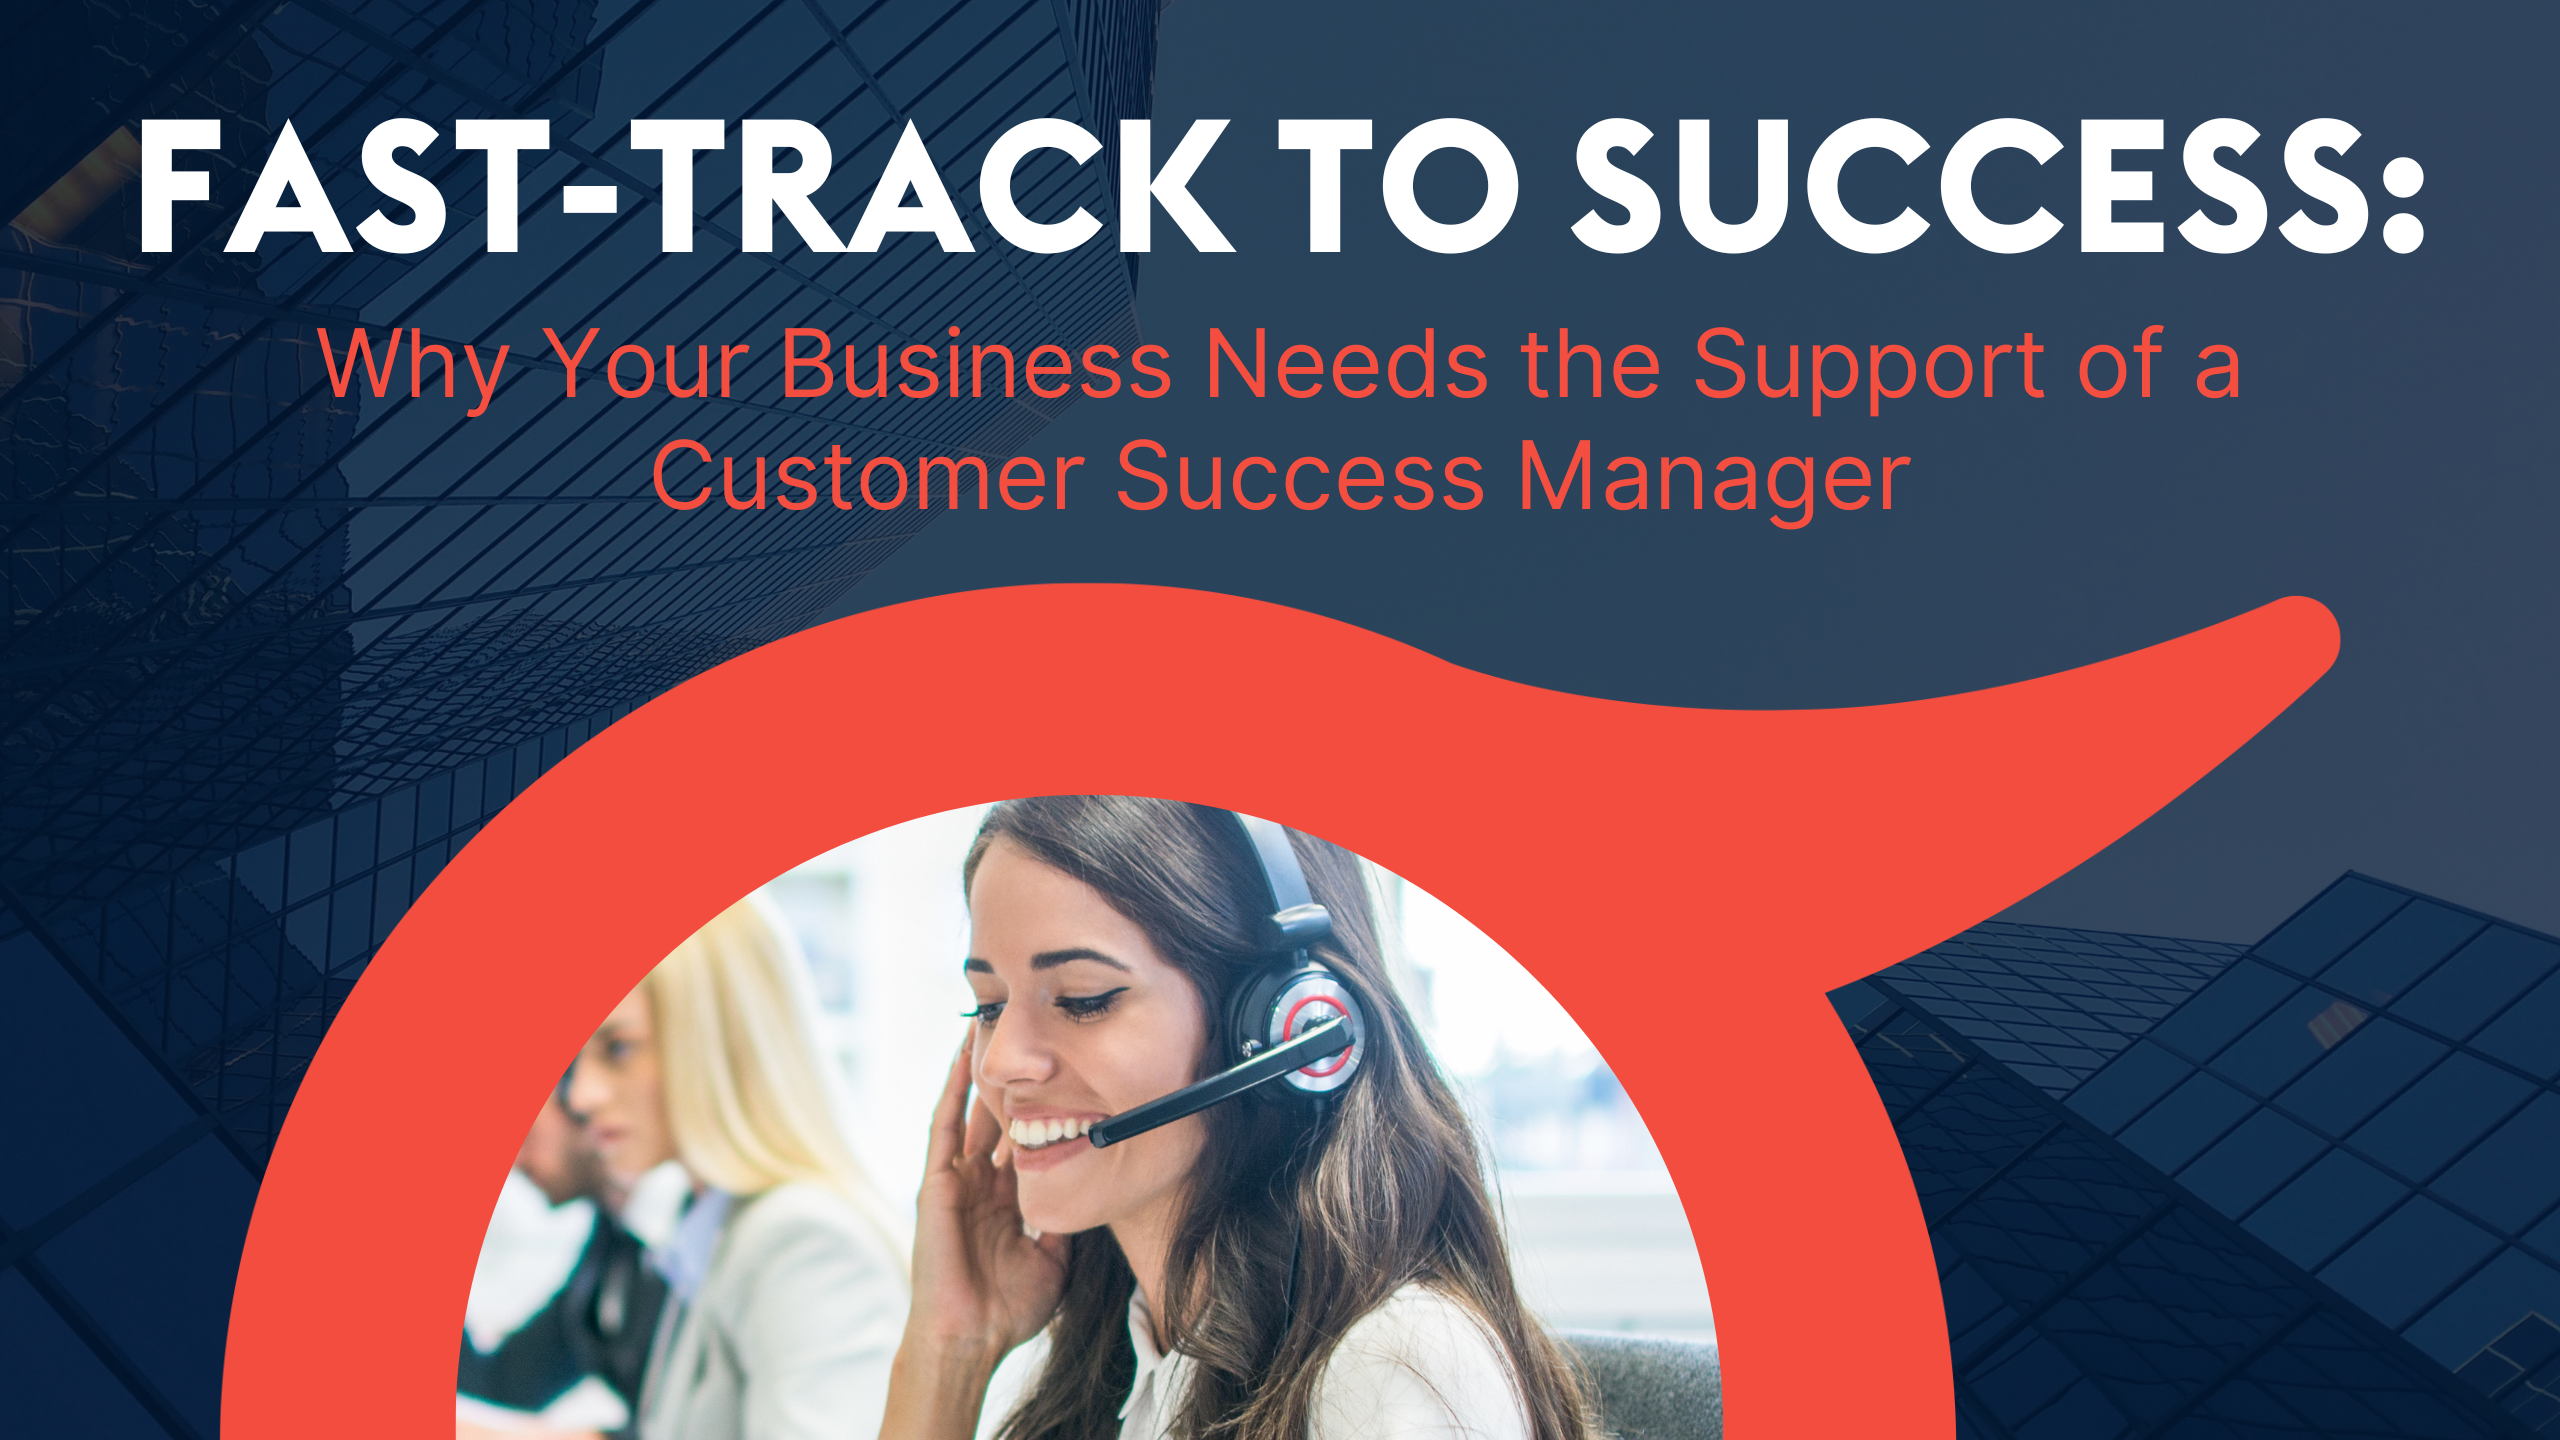 ProvidentCRM-CRM-Fast-track-to-Success-Why-Your-Business-Needs-Customer-Success-Manager